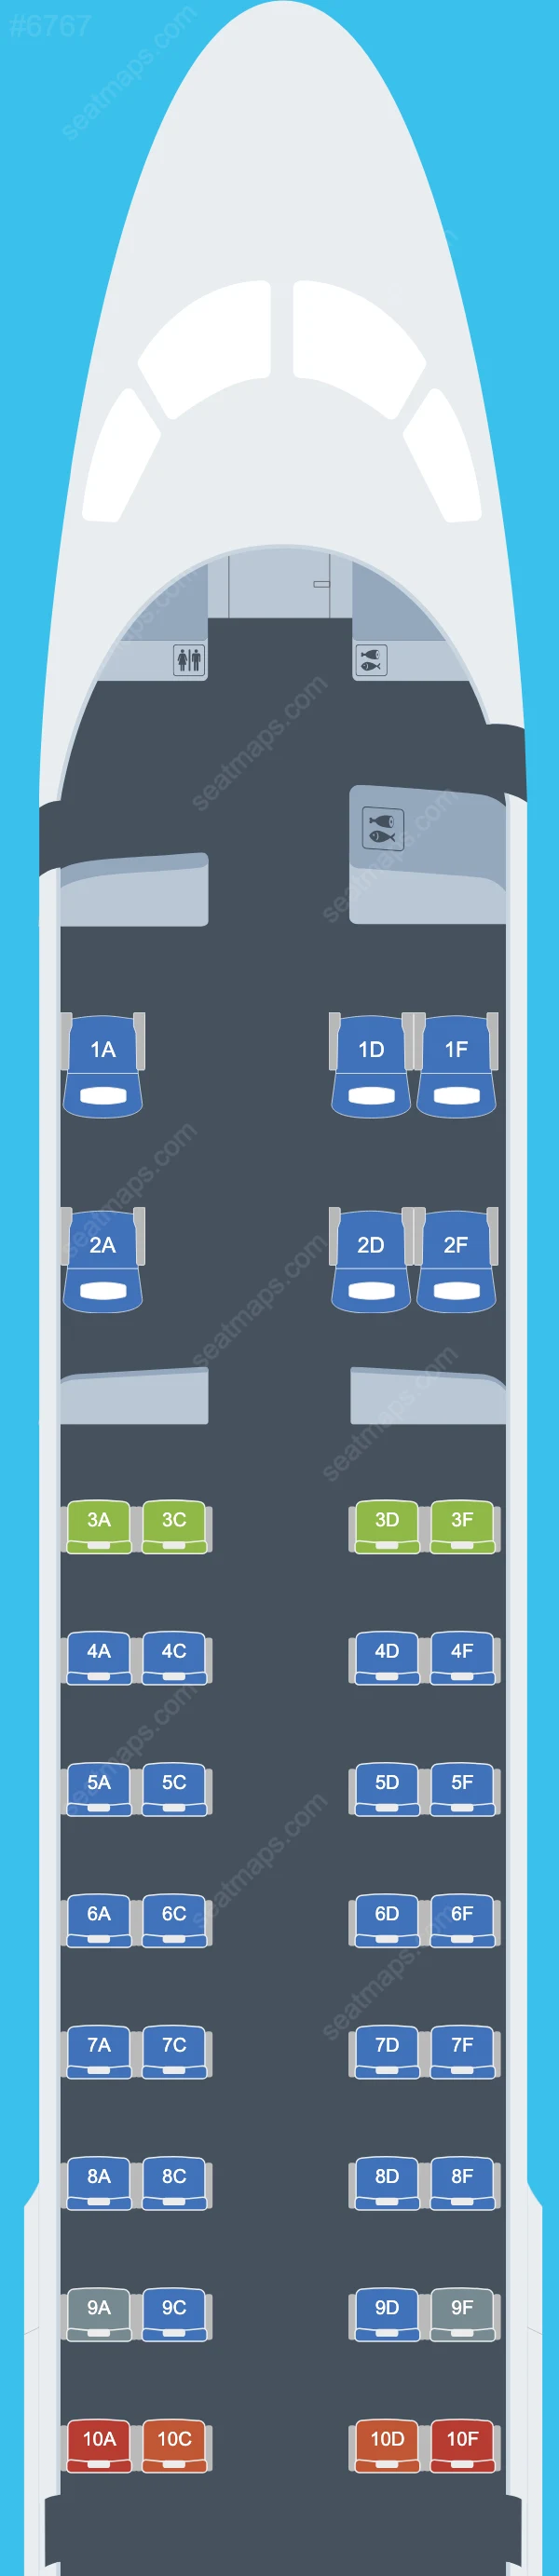 Airlink Embraer E190 seatmap mobile preview